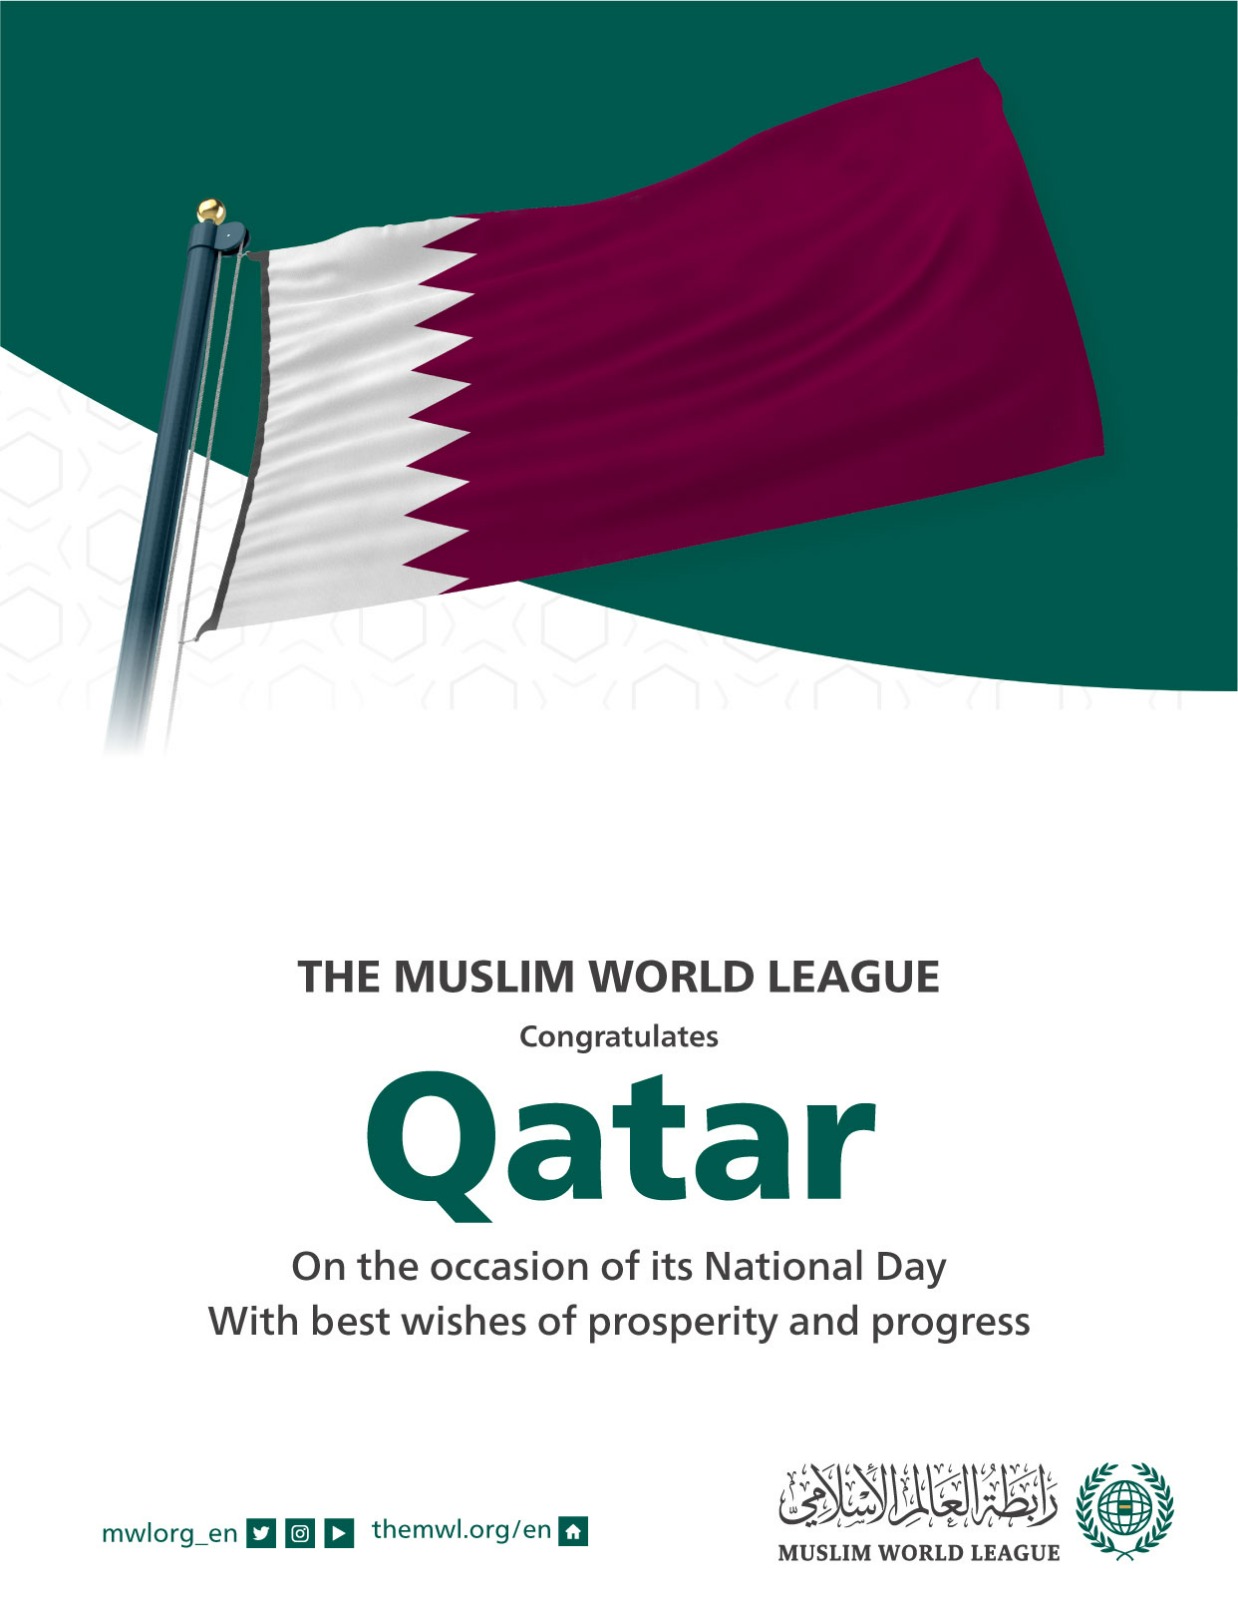 The Muslim World League congratulates Qatar on the occasion of its National Day.